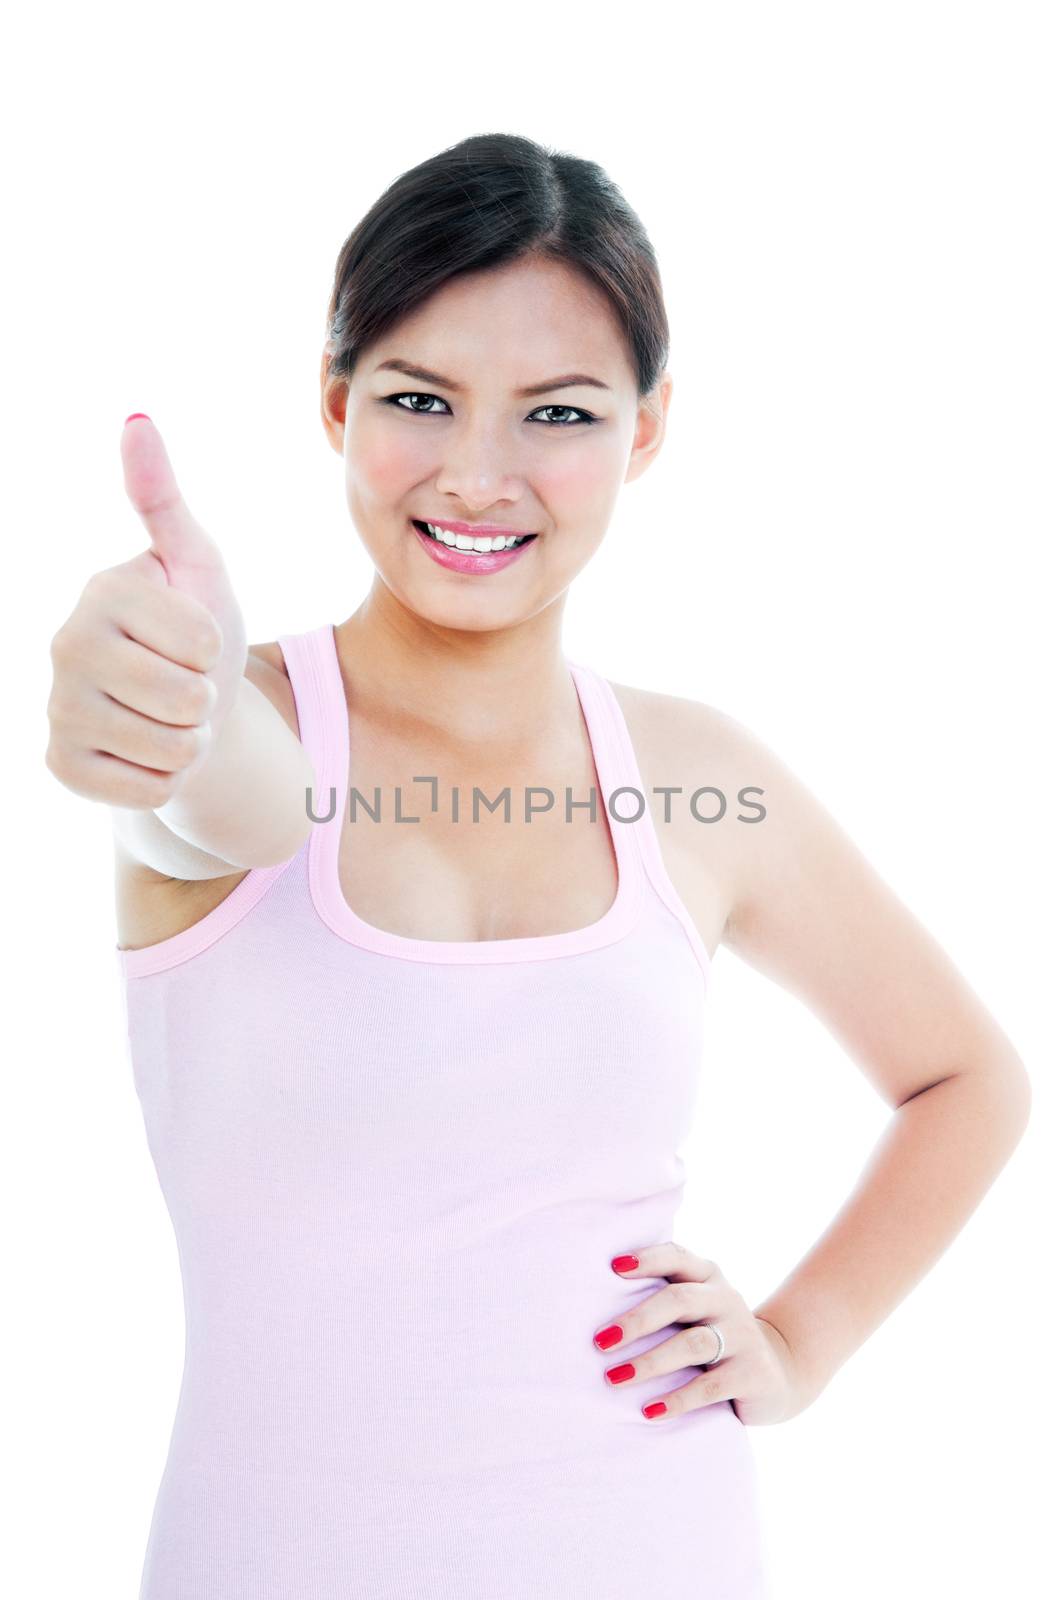 Portrait of a healthy young woman giving thumb up gesture over white background.